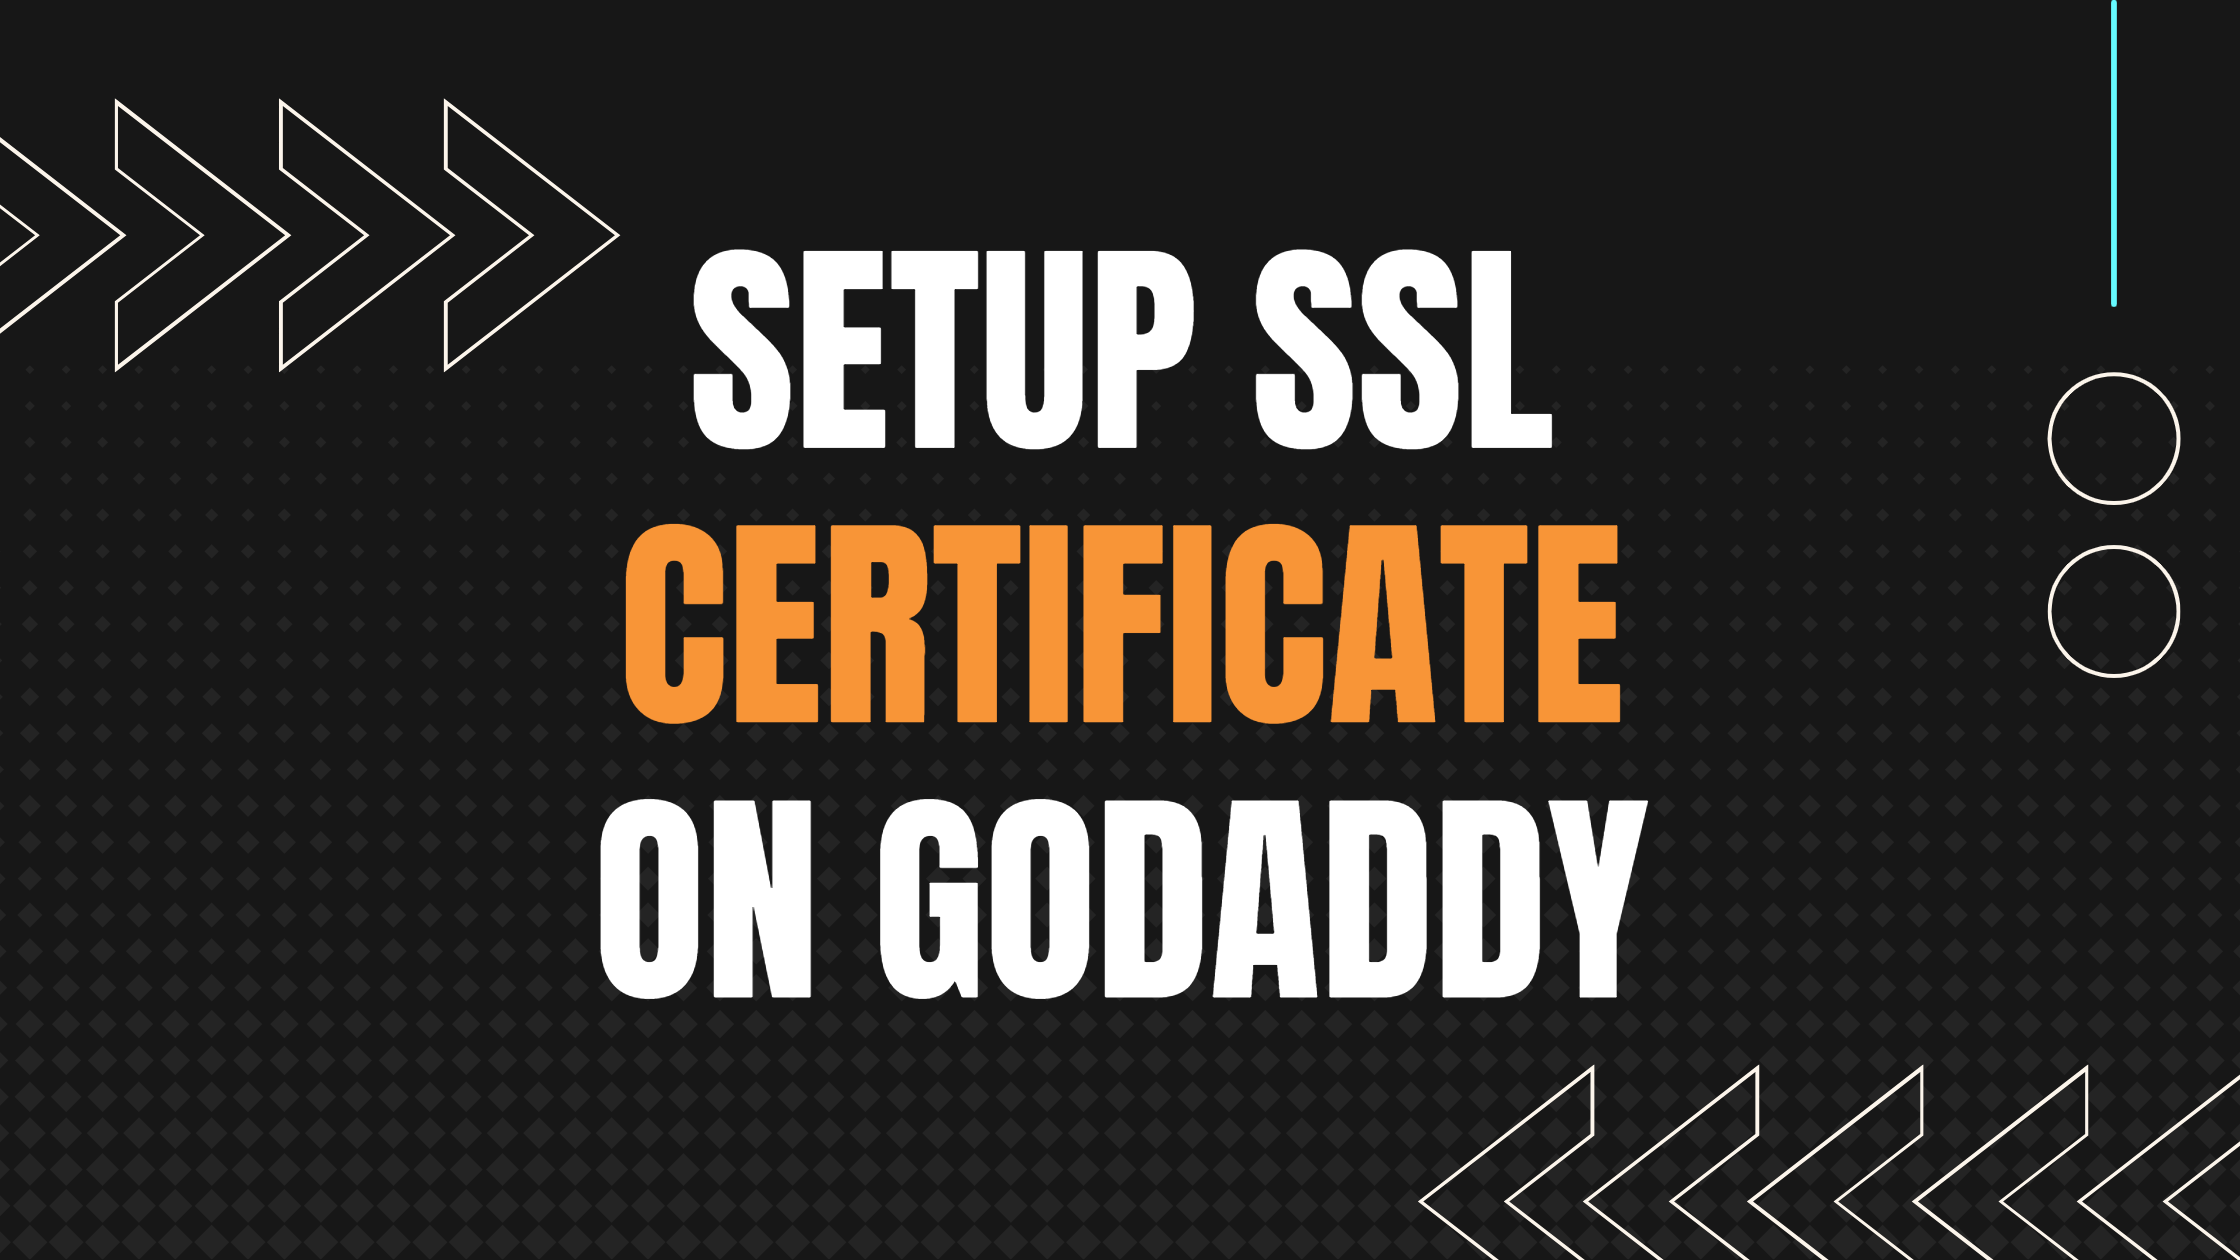 How To Set Up an SSL Certificate With GoDaddy